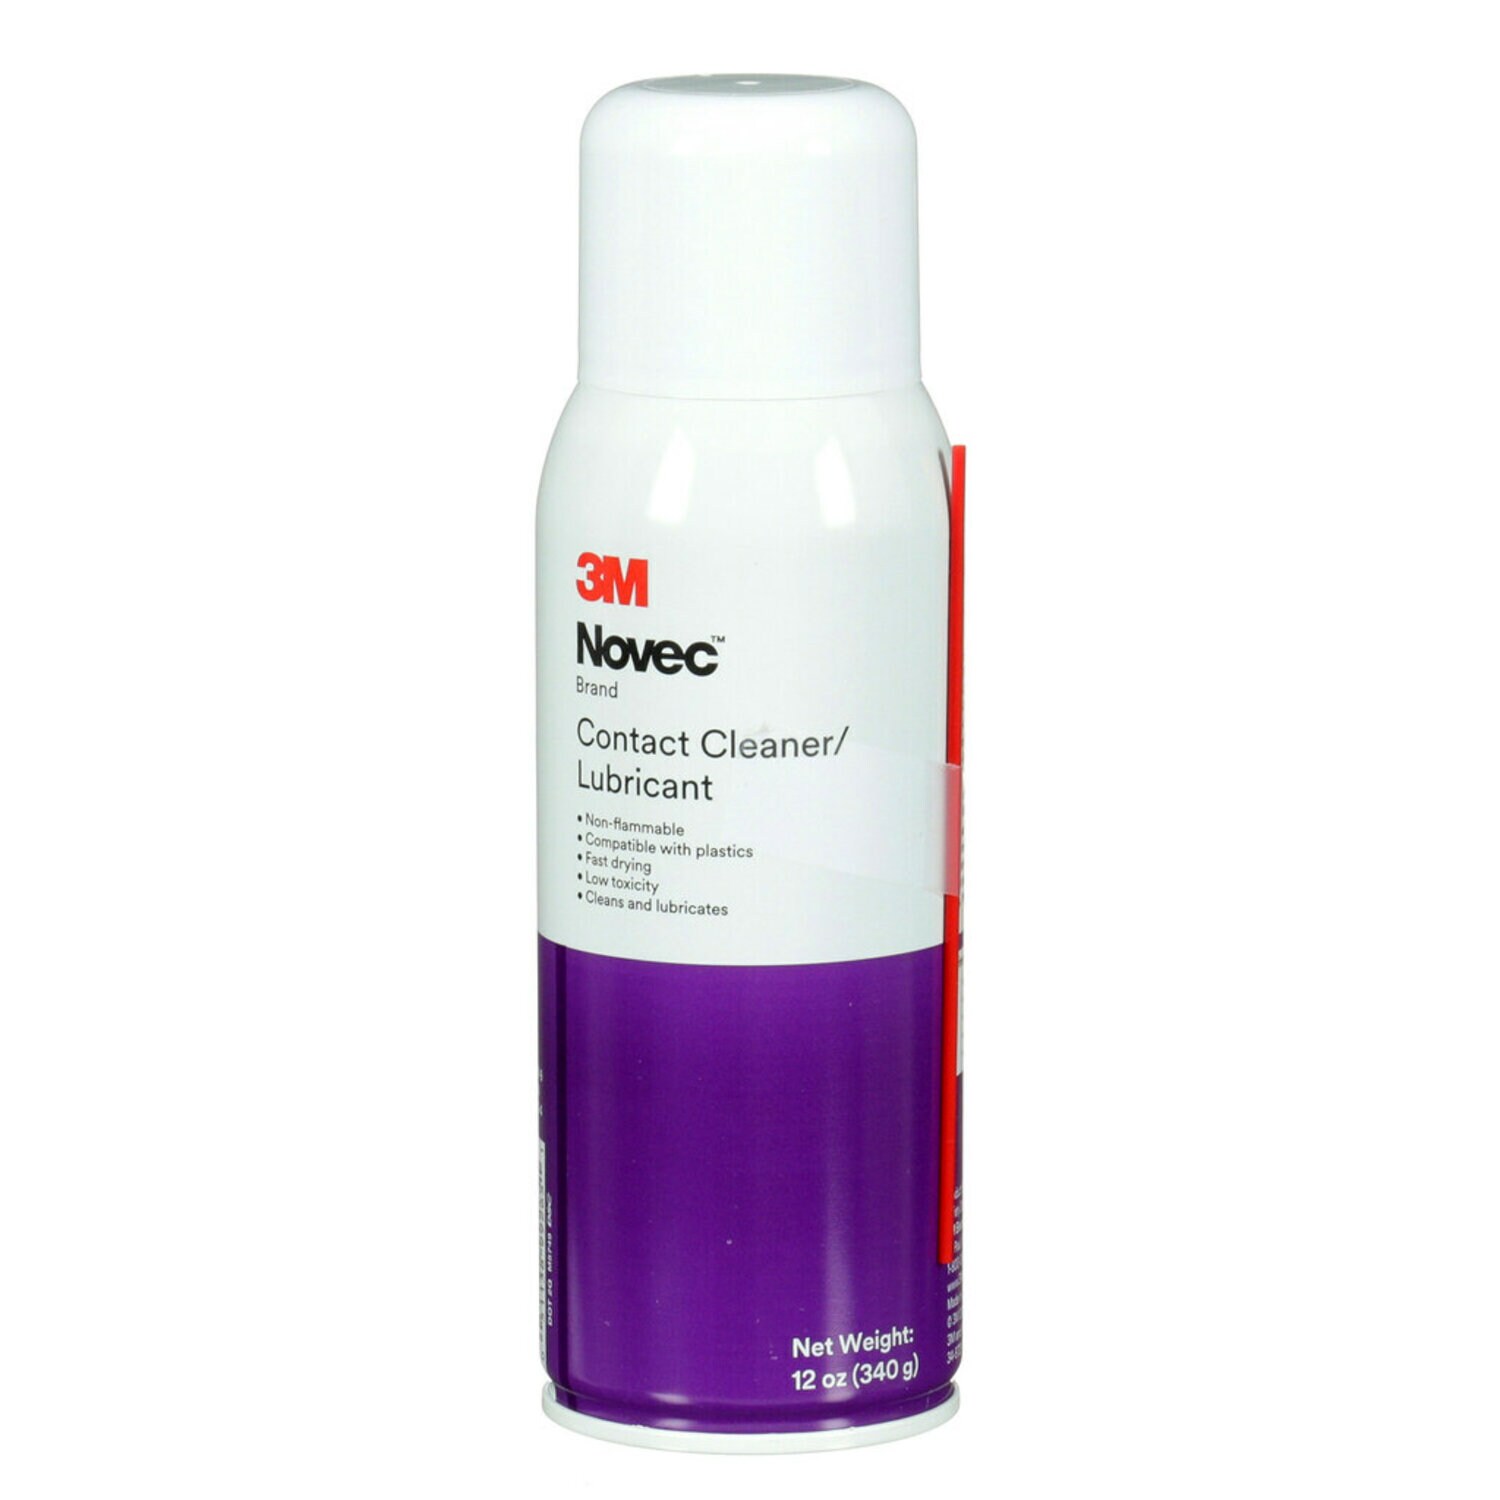 7010402232 - 3M Novec Contact Cleaner/Lubricant, 340 g (12 oz), 1 Canister/Case